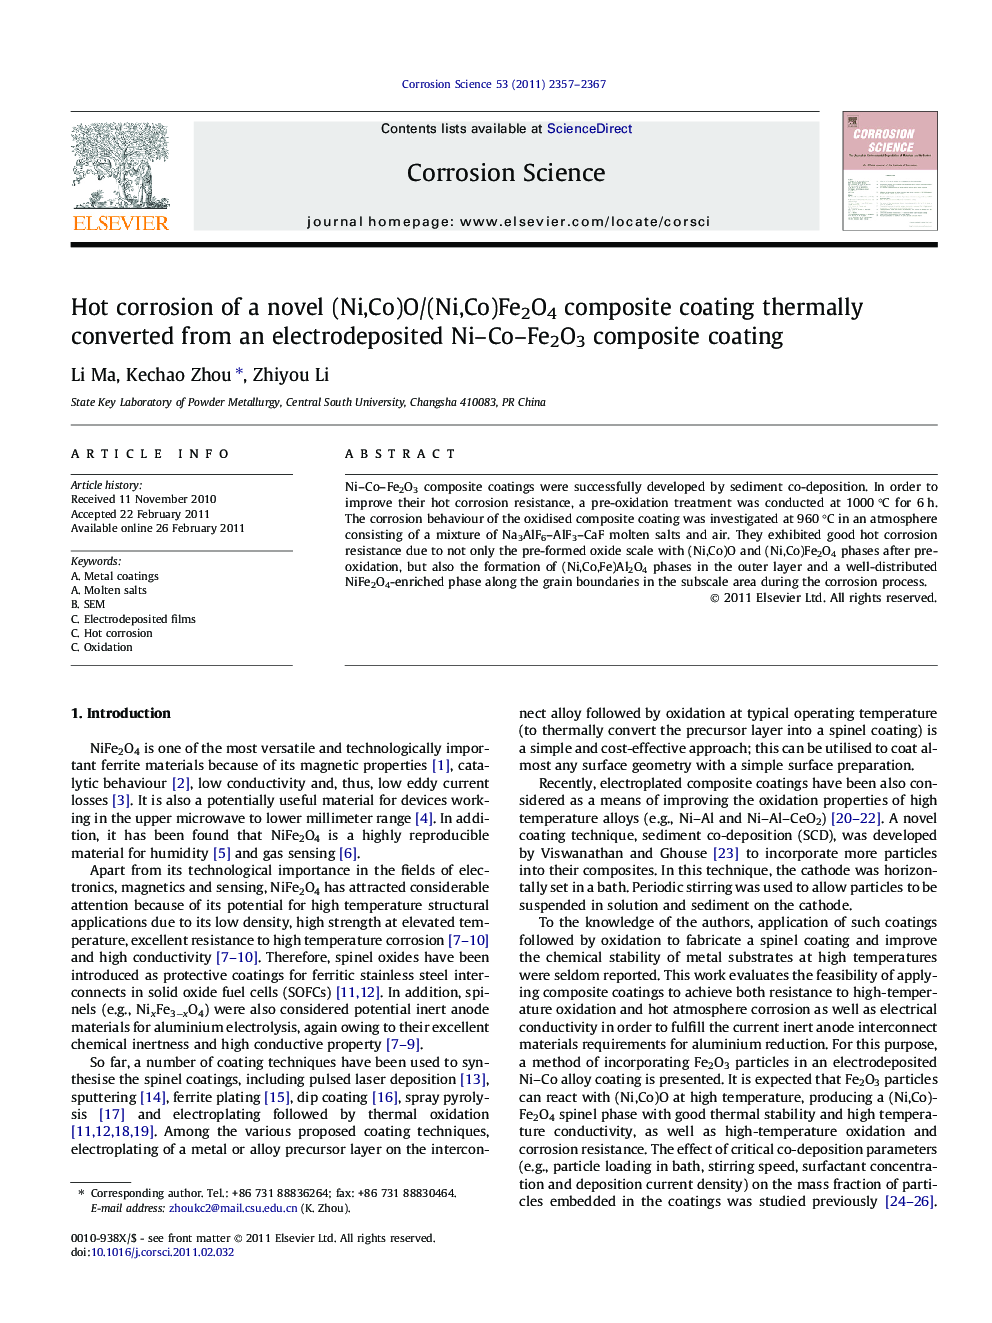 Hot corrosion of a novel (Ni,Co)O/(Ni,Co)Fe2O4 composite coating thermally converted from an electrodeposited Ni–Co–Fe2O3 composite coating